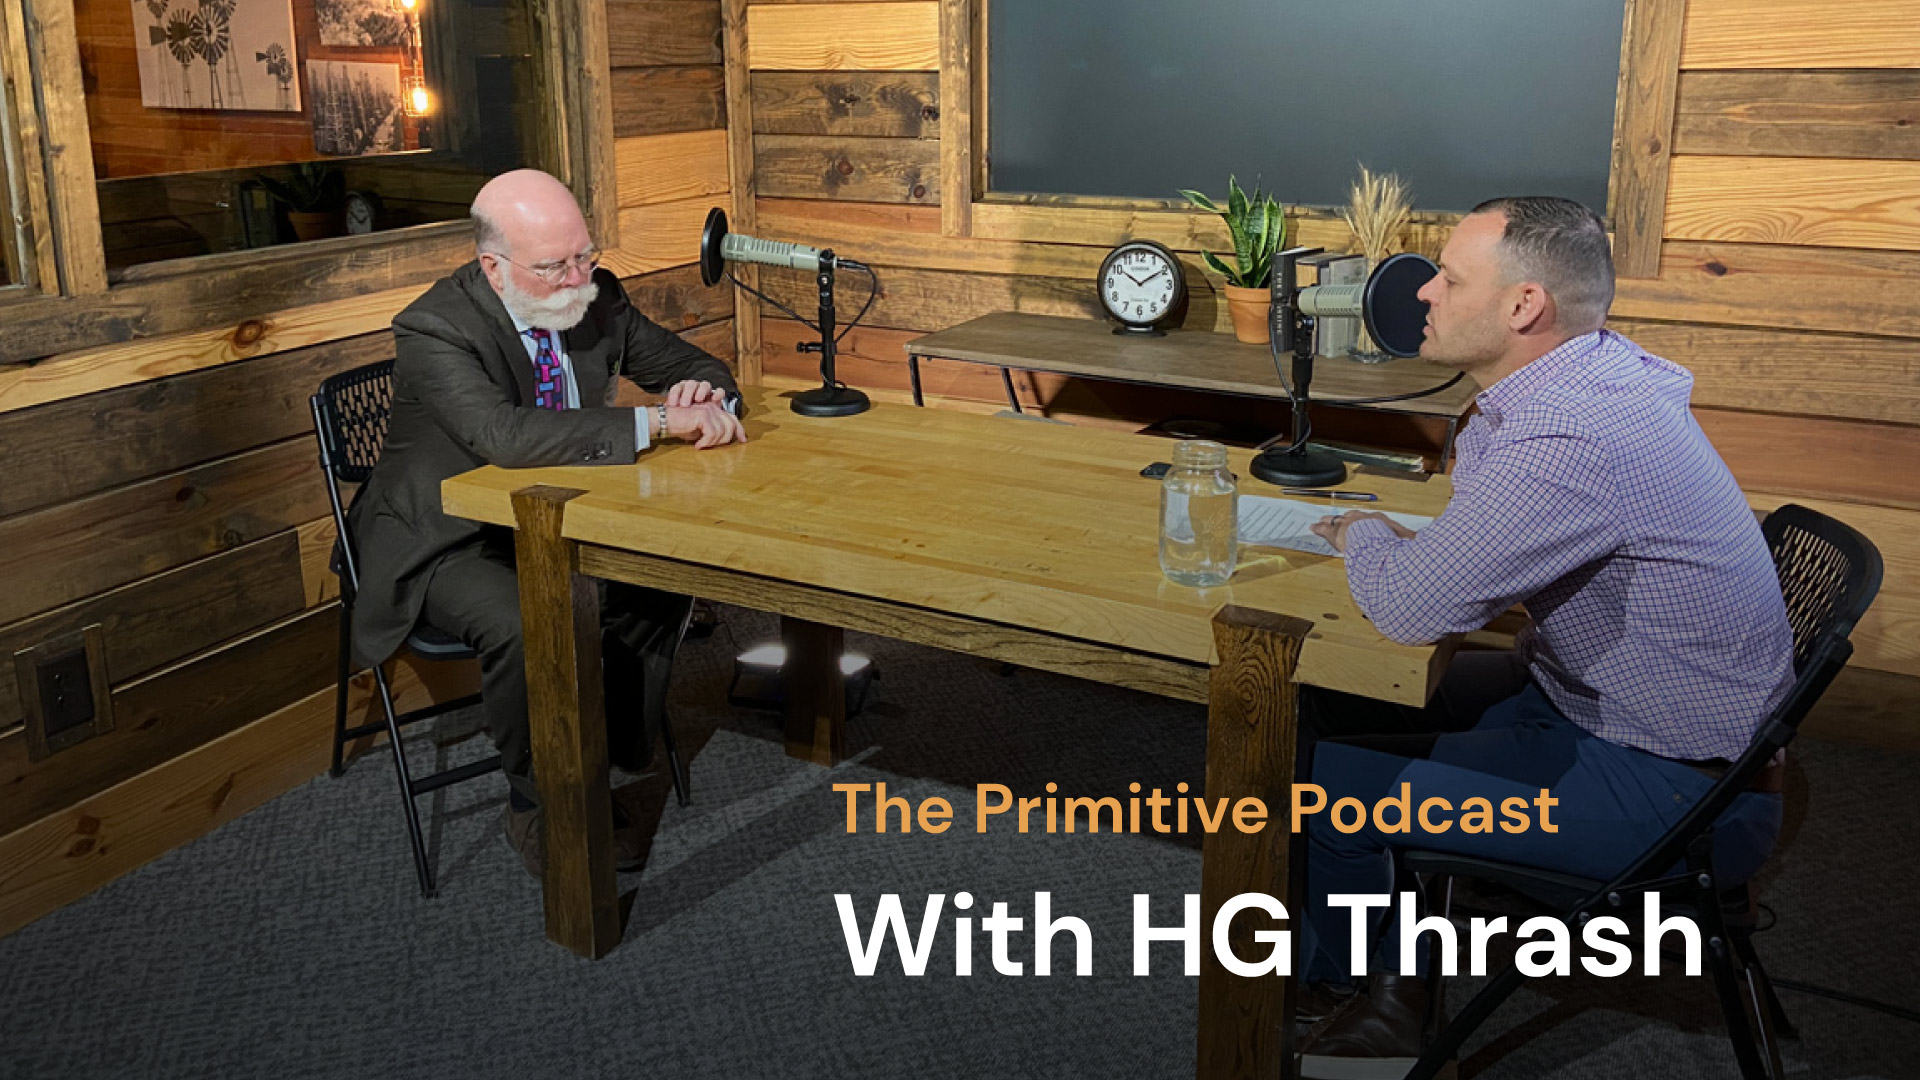 The Primitive Podcast with HG Thrash